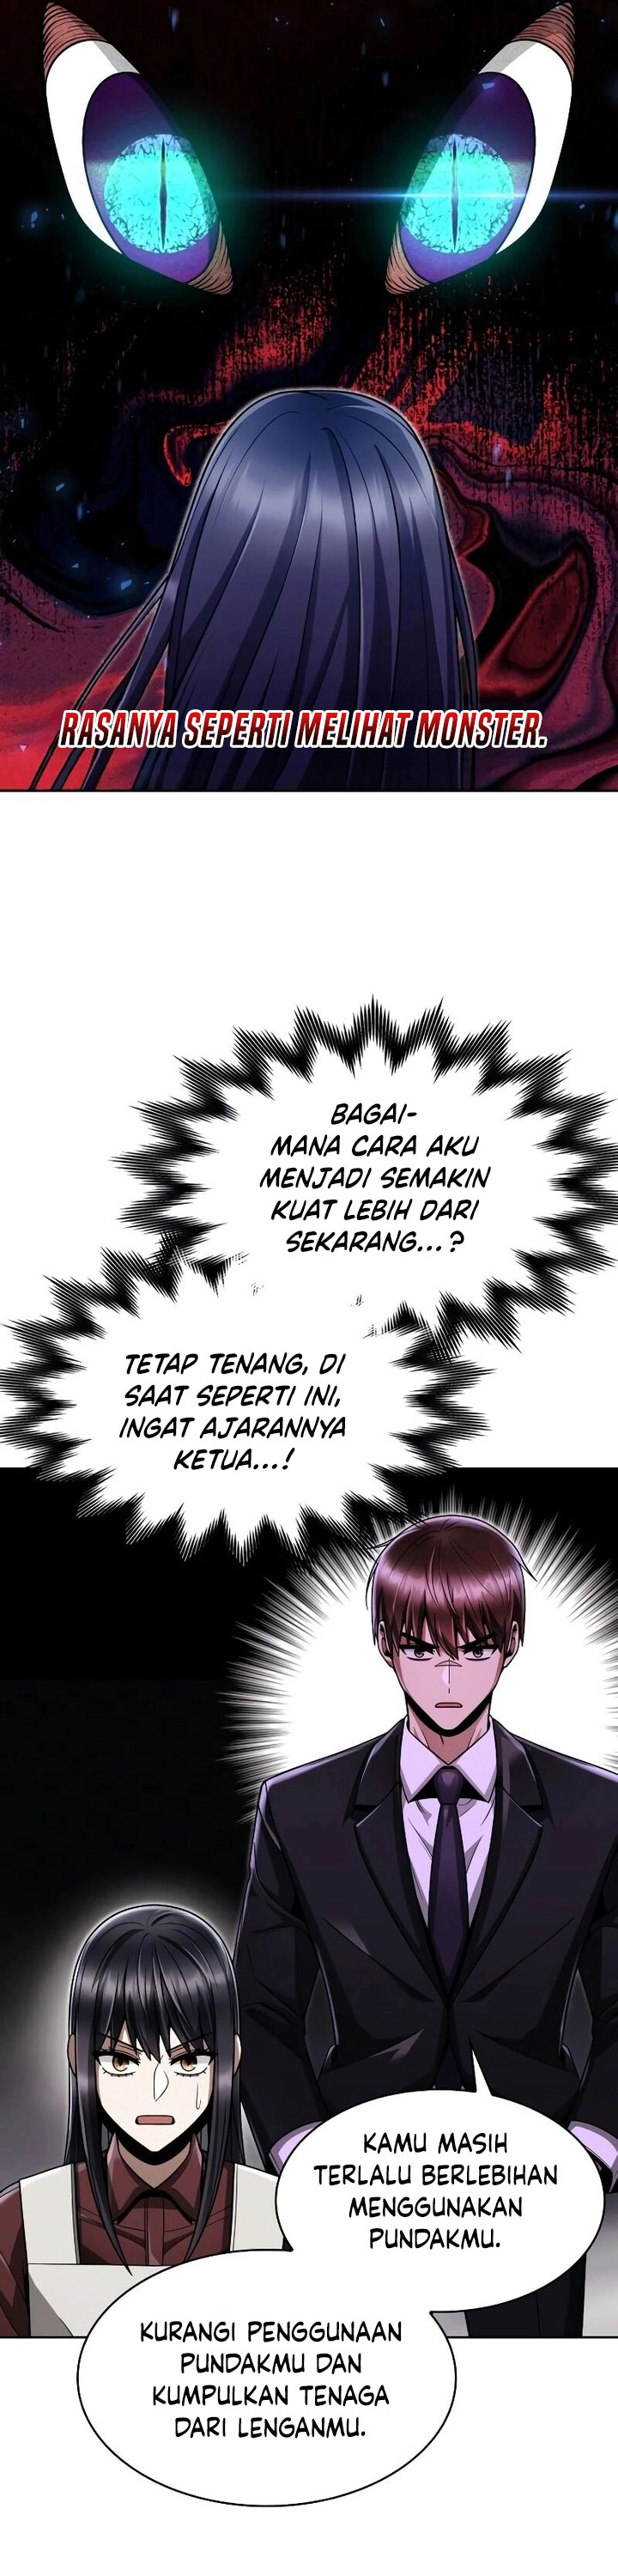 Dilarang COPAS - situs resmi www.mangacanblog.com - Komik clever cleaning life of the returned genius hunter 065 - chapter 65 66 Indonesia clever cleaning life of the returned genius hunter 065 - chapter 65 Terbaru 46|Baca Manga Komik Indonesia|Mangacan